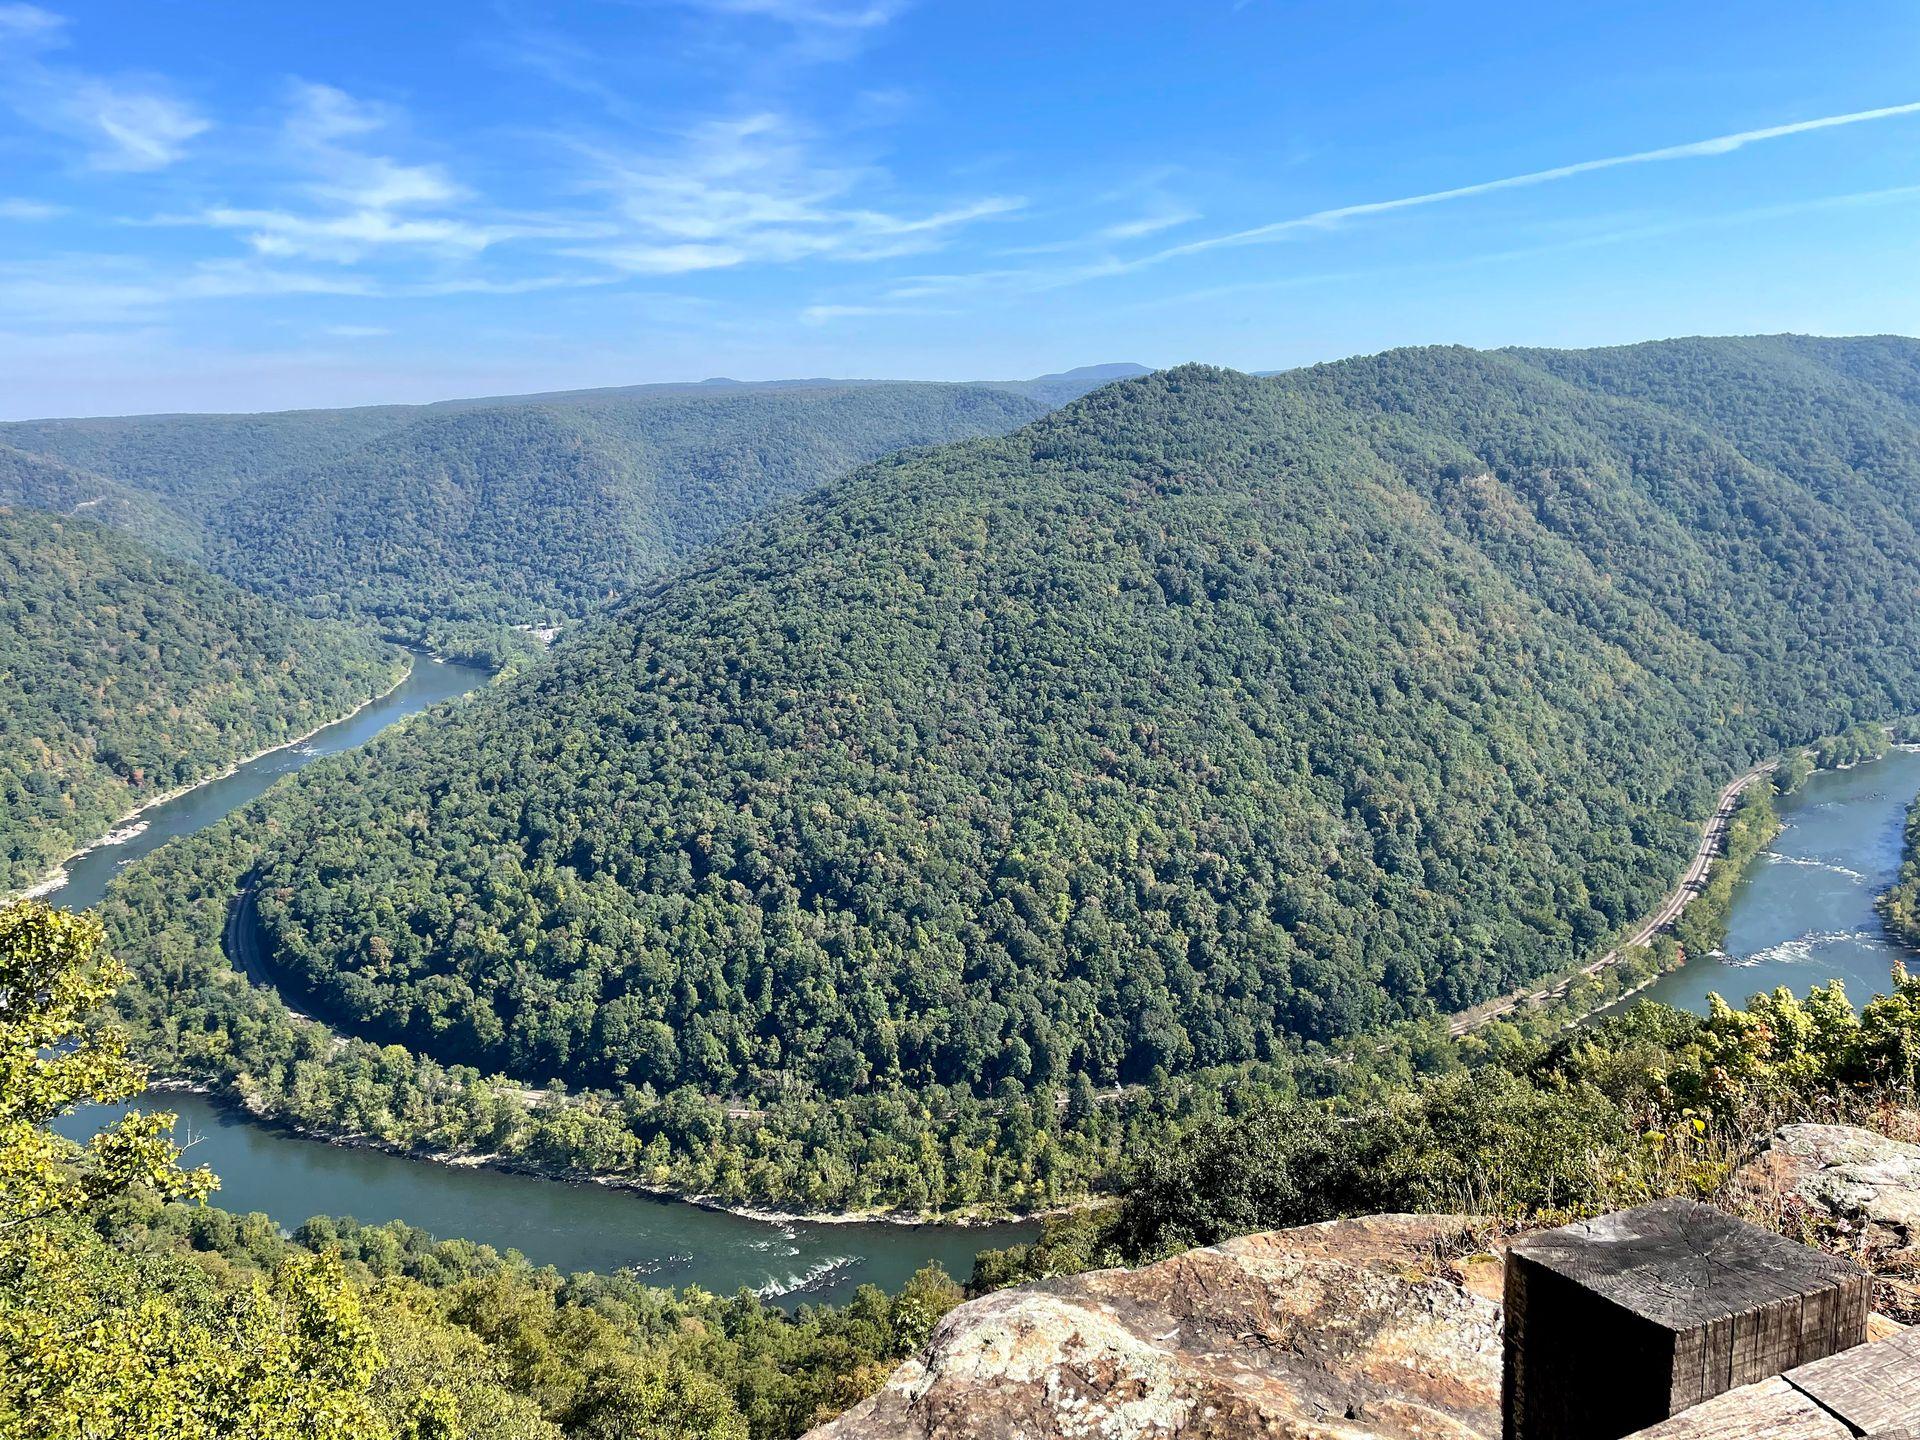 A large bend in the river at the Grandview Main Overlook.